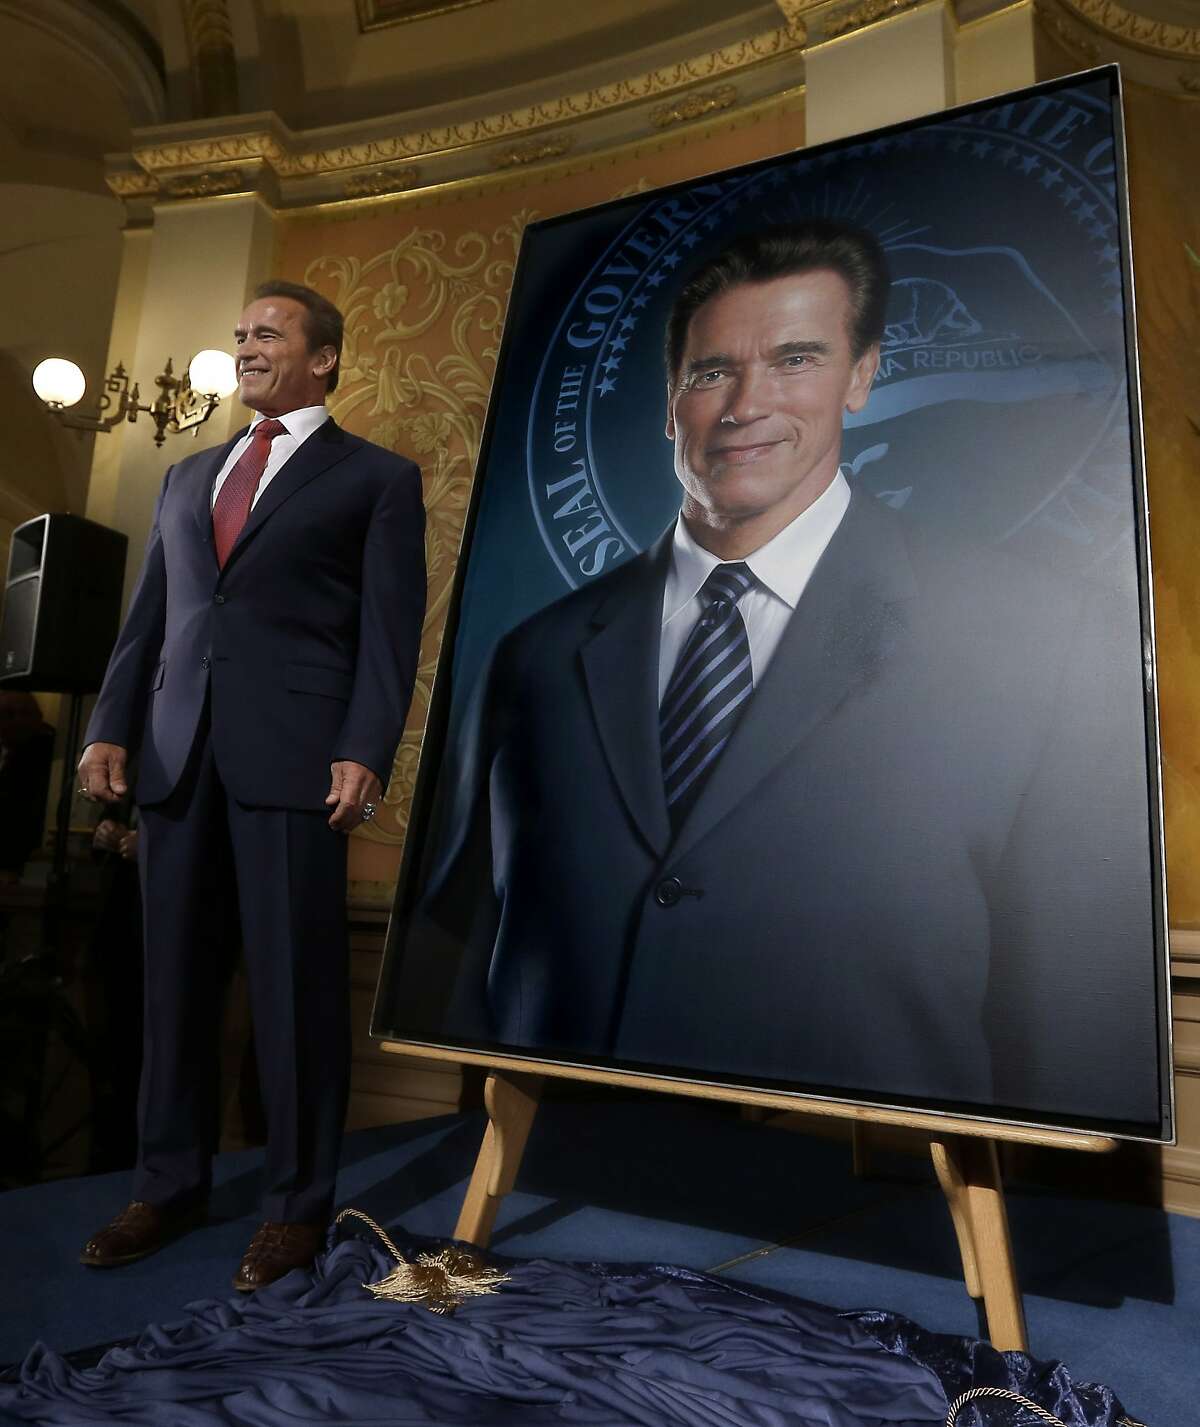 Former Gov. Arnold Schwarzenegger unveil's his official portrait during ceremonies at the Capitol in Sacramento, Calif., Monday, Sept. 8, 2014. The photograph-like giant image of the former governor was done by Austrian artist Gottfried Helnwein and will hang on the third floor of the Capitol. (AP Photo/Rich Pedroncelli)